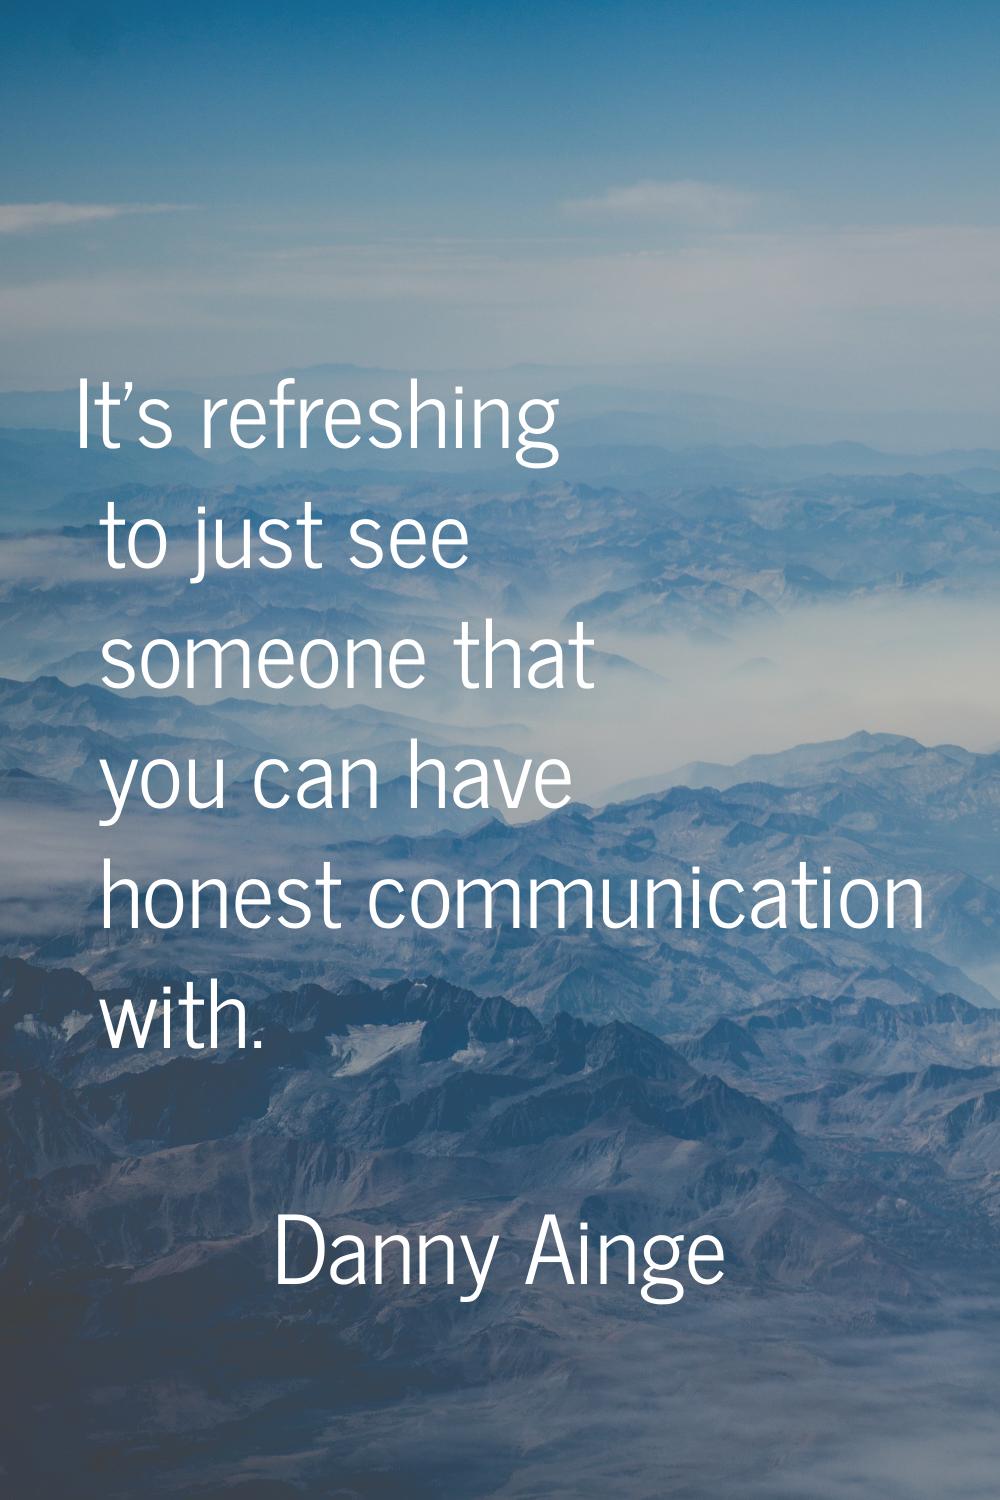 It's refreshing to just see someone that you can have honest communication with.